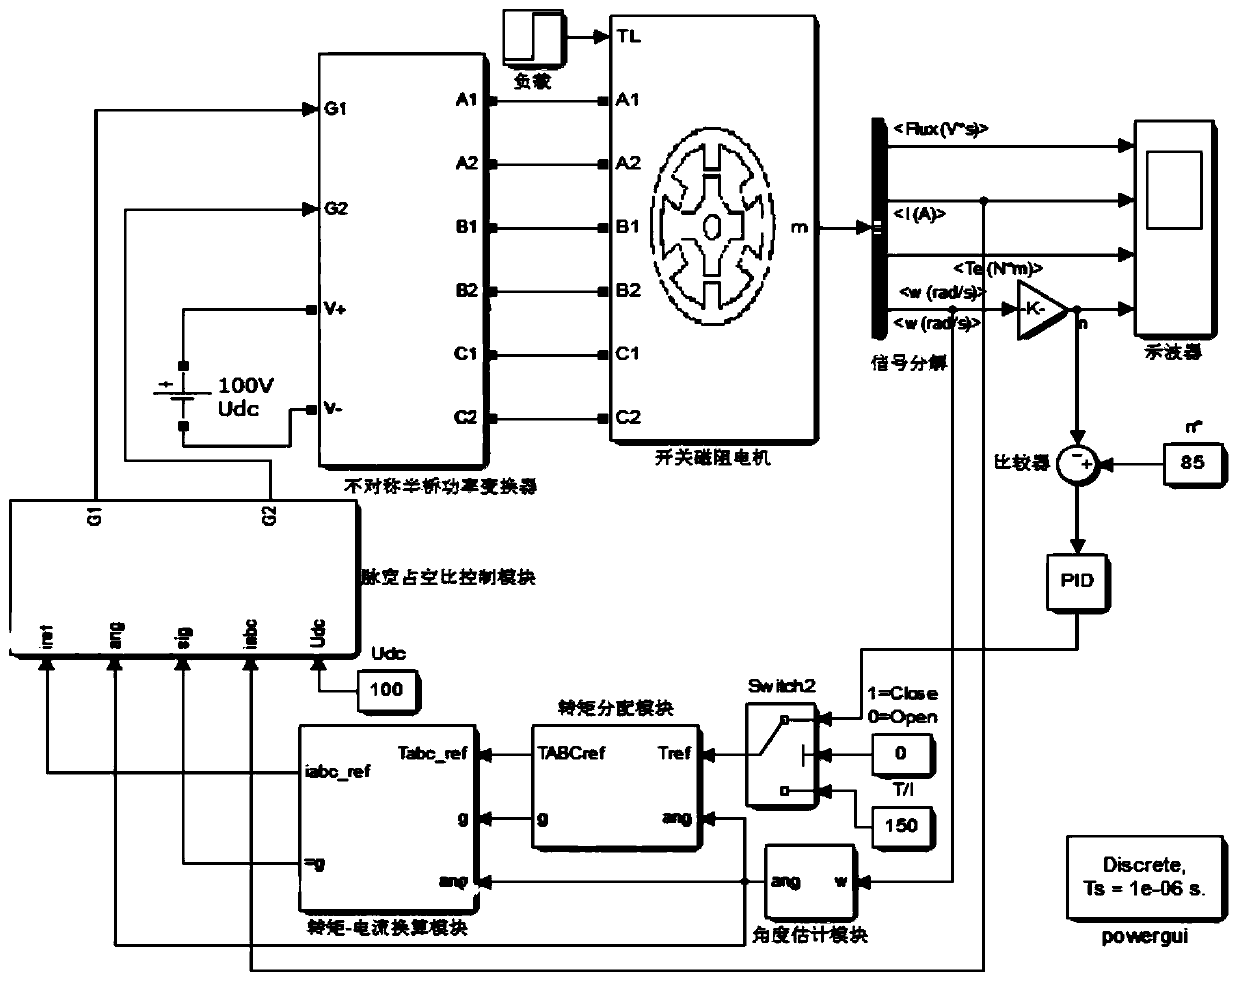 A switched reluctance motor current tracking control method, controller and speed regulating system